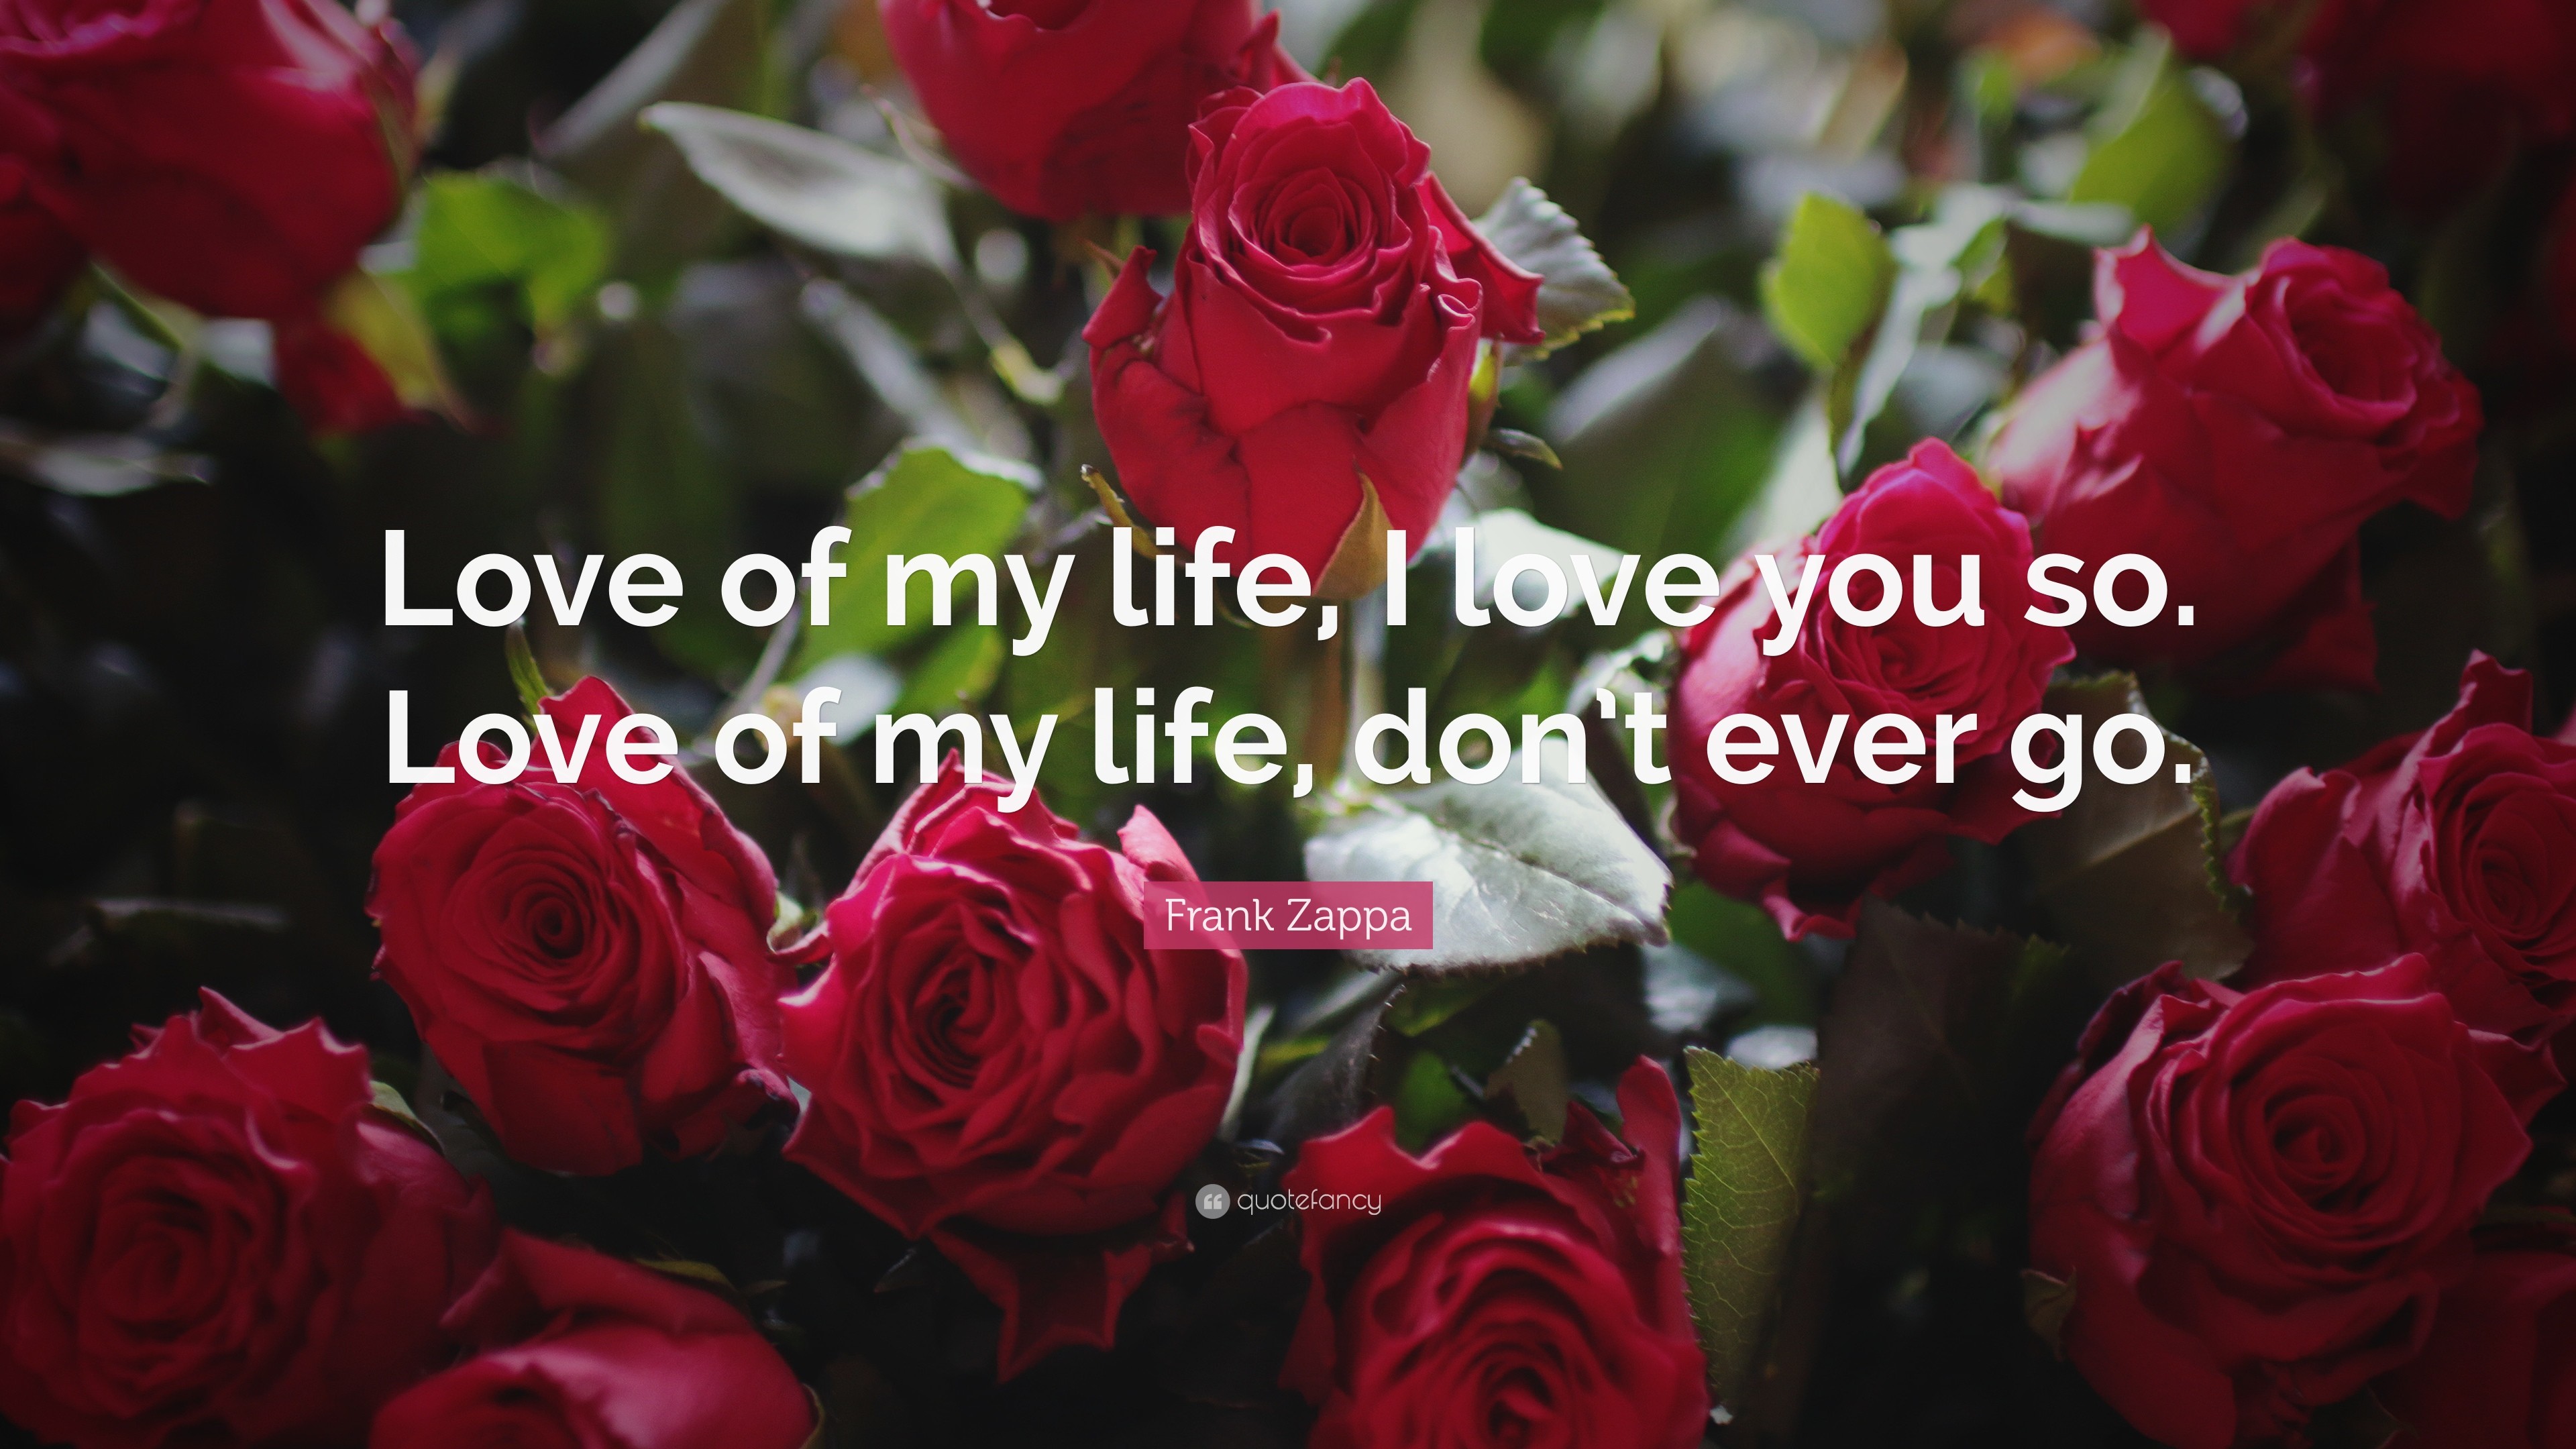 3840x2160 Love You Quotes: “Love of my life, I love you so. Love